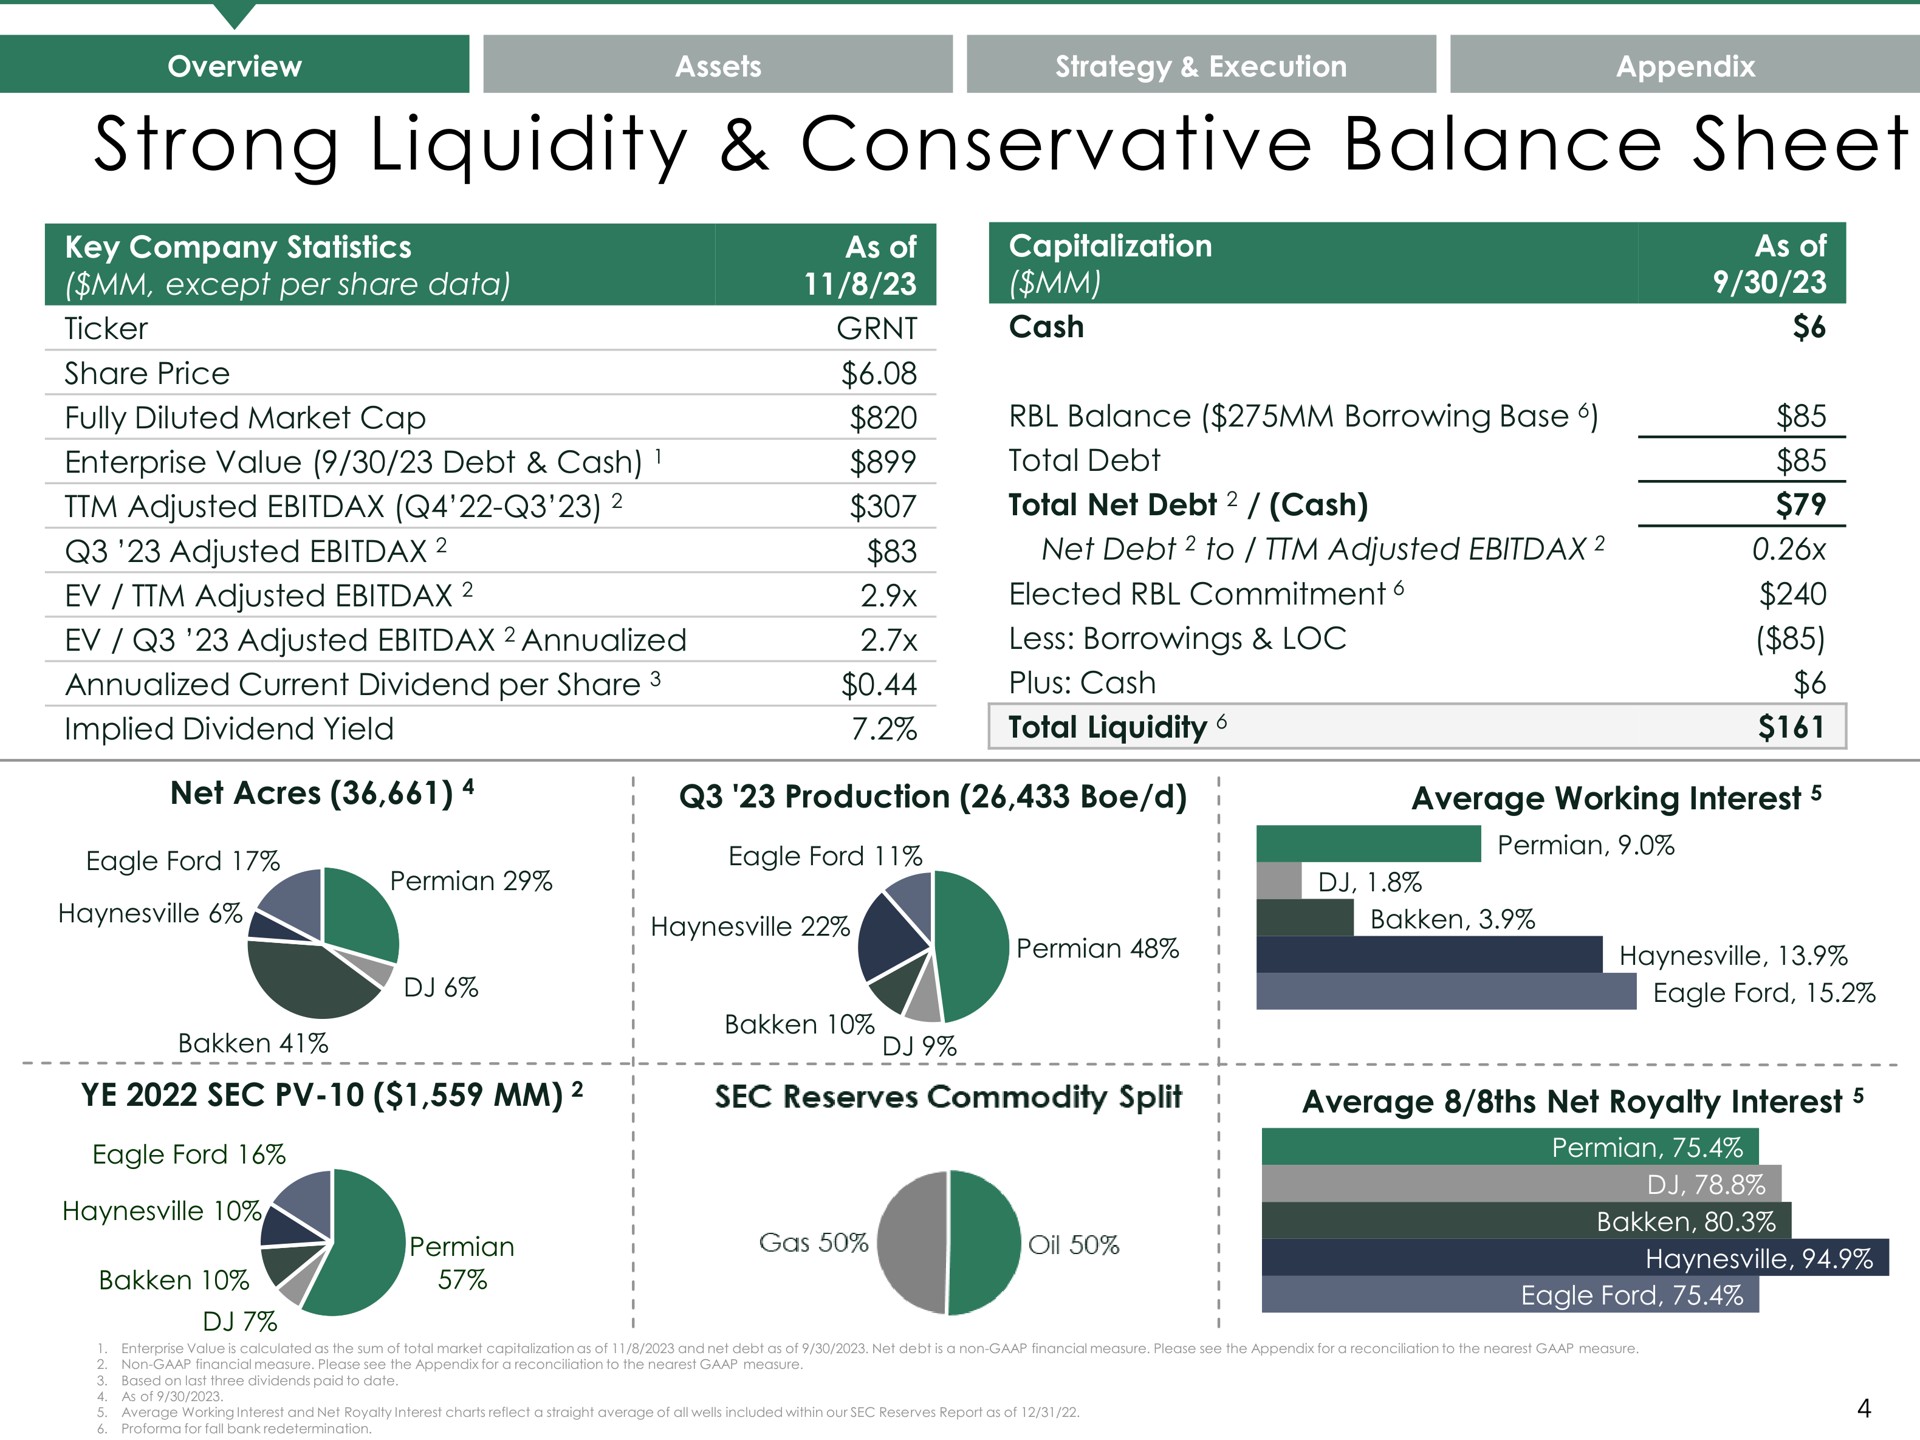 strong liquidity conservative balance sheet a overview assets strategy a execution appendix | Granite Ridge